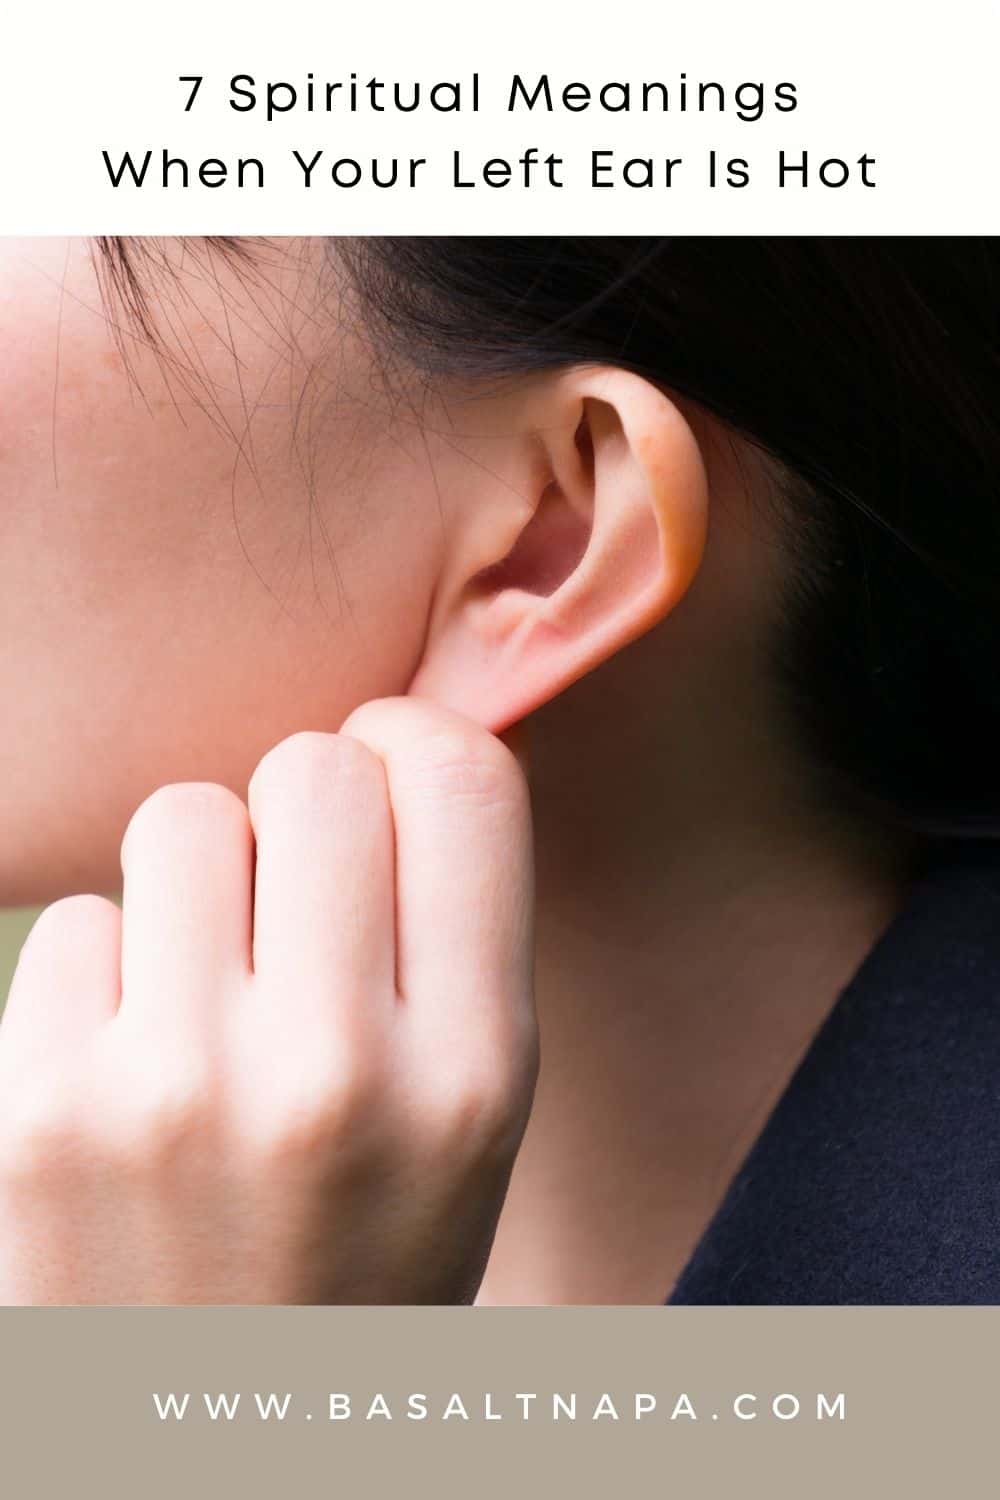 7 Spiritual Meanings When Your Left Ear Is Hot